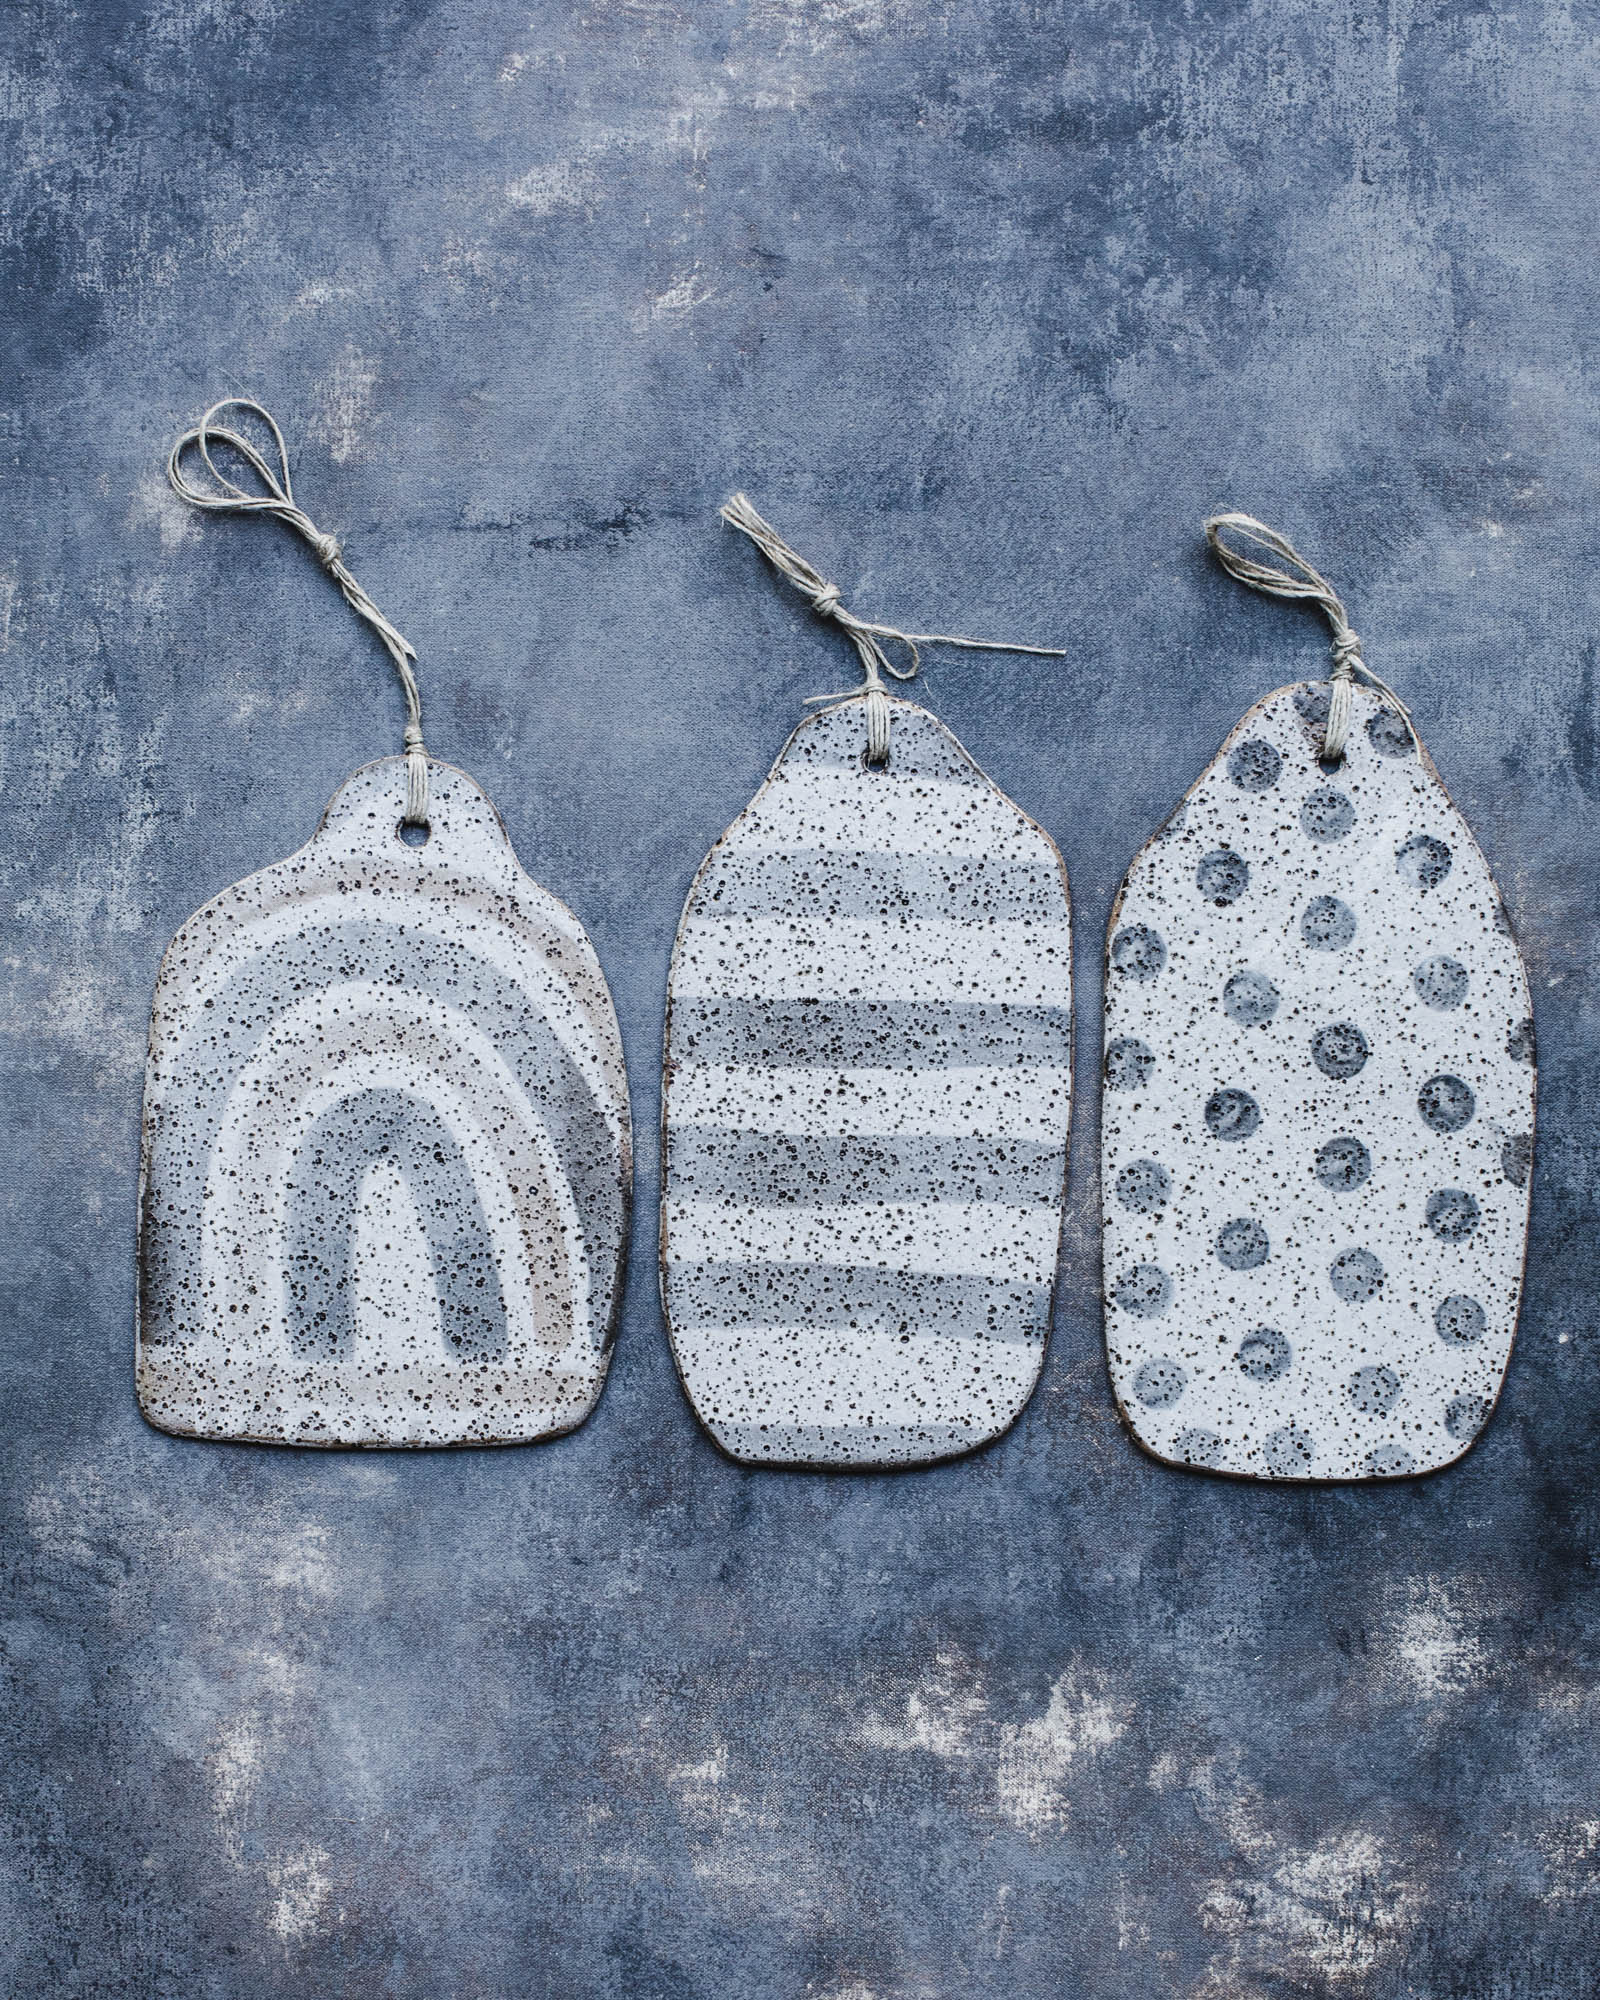 Rustic gritty speckled cheese board platters by clay beehive ceramics